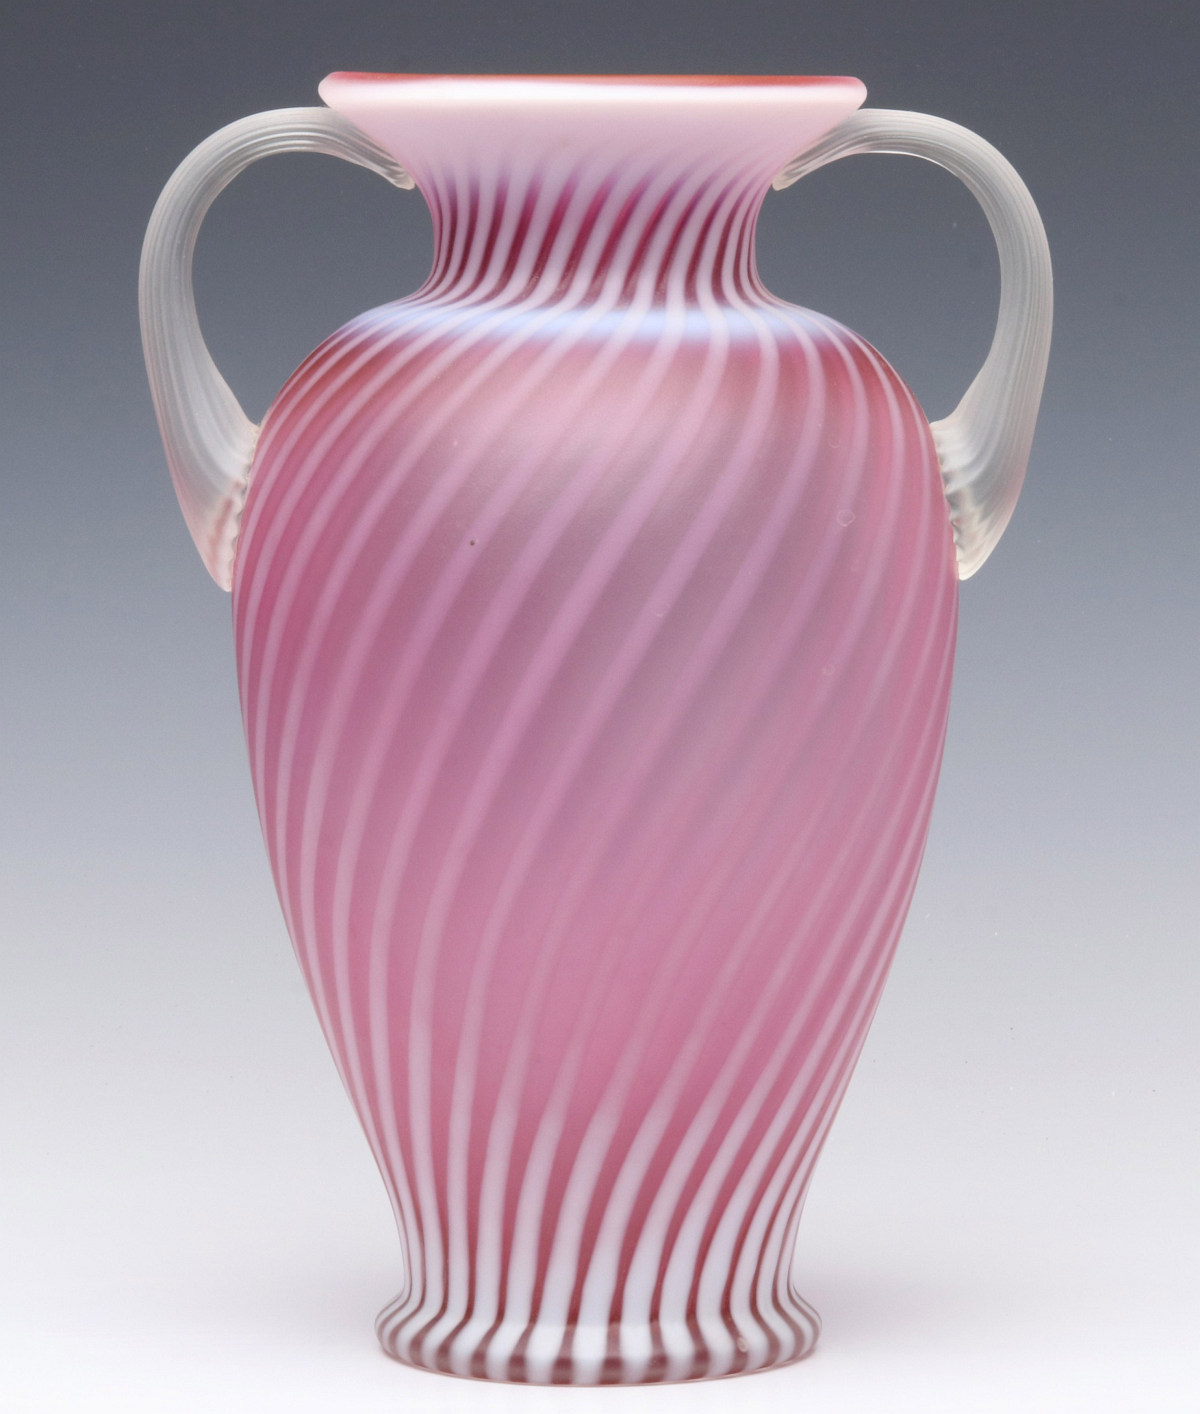 A FENTON SIGNED AND NUMBERED SPIRAL OPTIC VASE